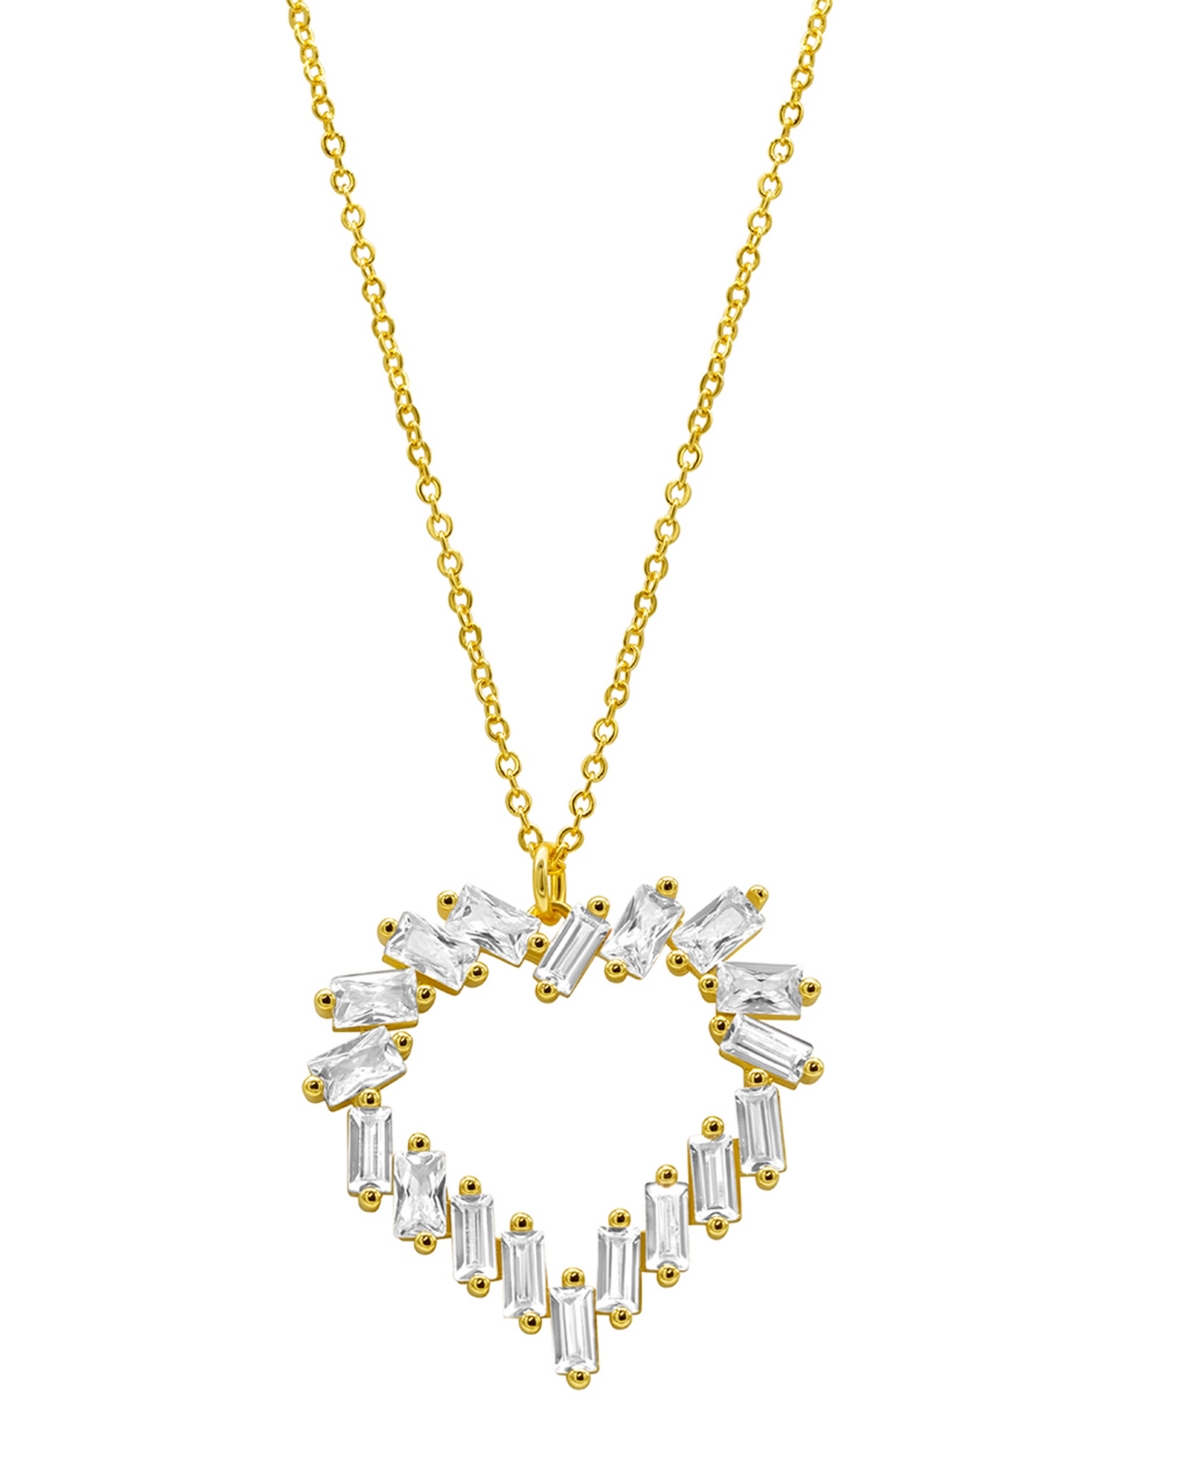 Shop Adornia 14k Gold-plated Crystal Baguette Heart Pendant Necklace